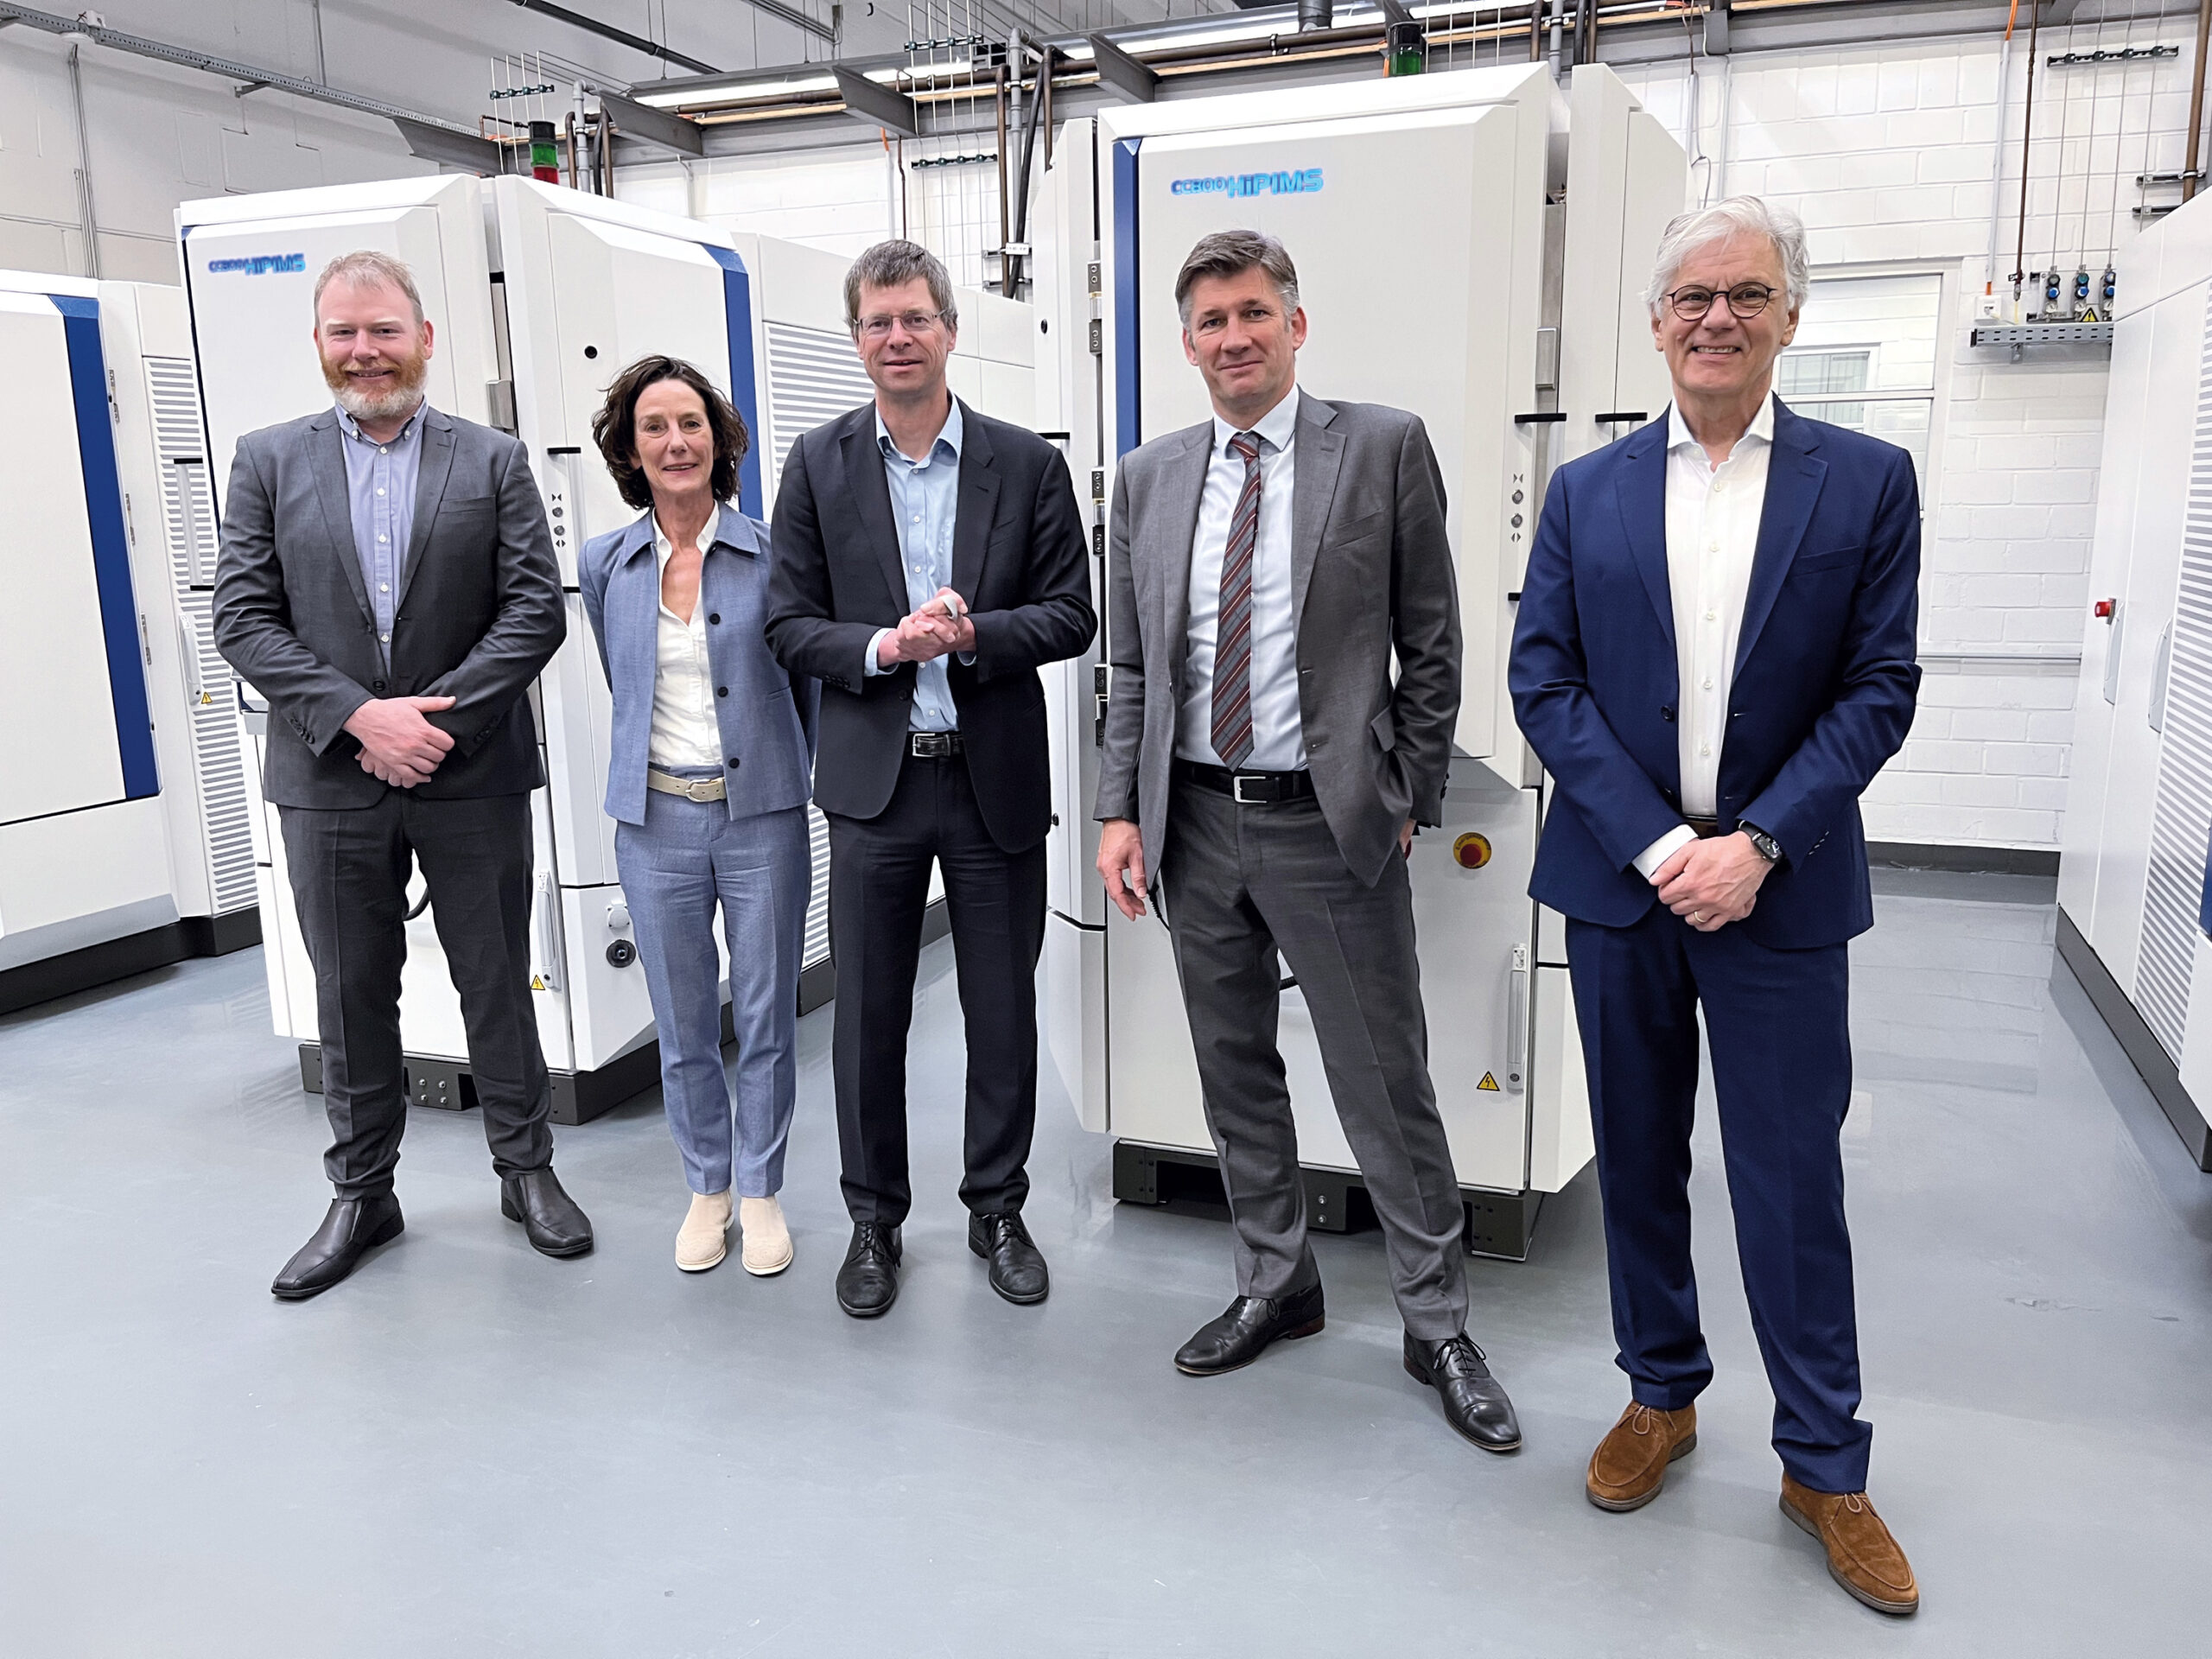 ANCA und CemeCon vertiefen ihre Zusammenarbeit (von links): Edmund Boland, General Manager, ANCA CNC Machines, Dr.-Ing. Beate Hüttermann, CMO, CemeCon AG, Dr.-Ing. Christoph Schiffers, Product Man-ager Coating Technology, CemeCon AG, Martin Ripple, CEO, ANCA-Gruppe, und Dr.-Ing. Jan Langfelder, Global Key Account Manager, ANCA. (Foto: CemeCon AG)